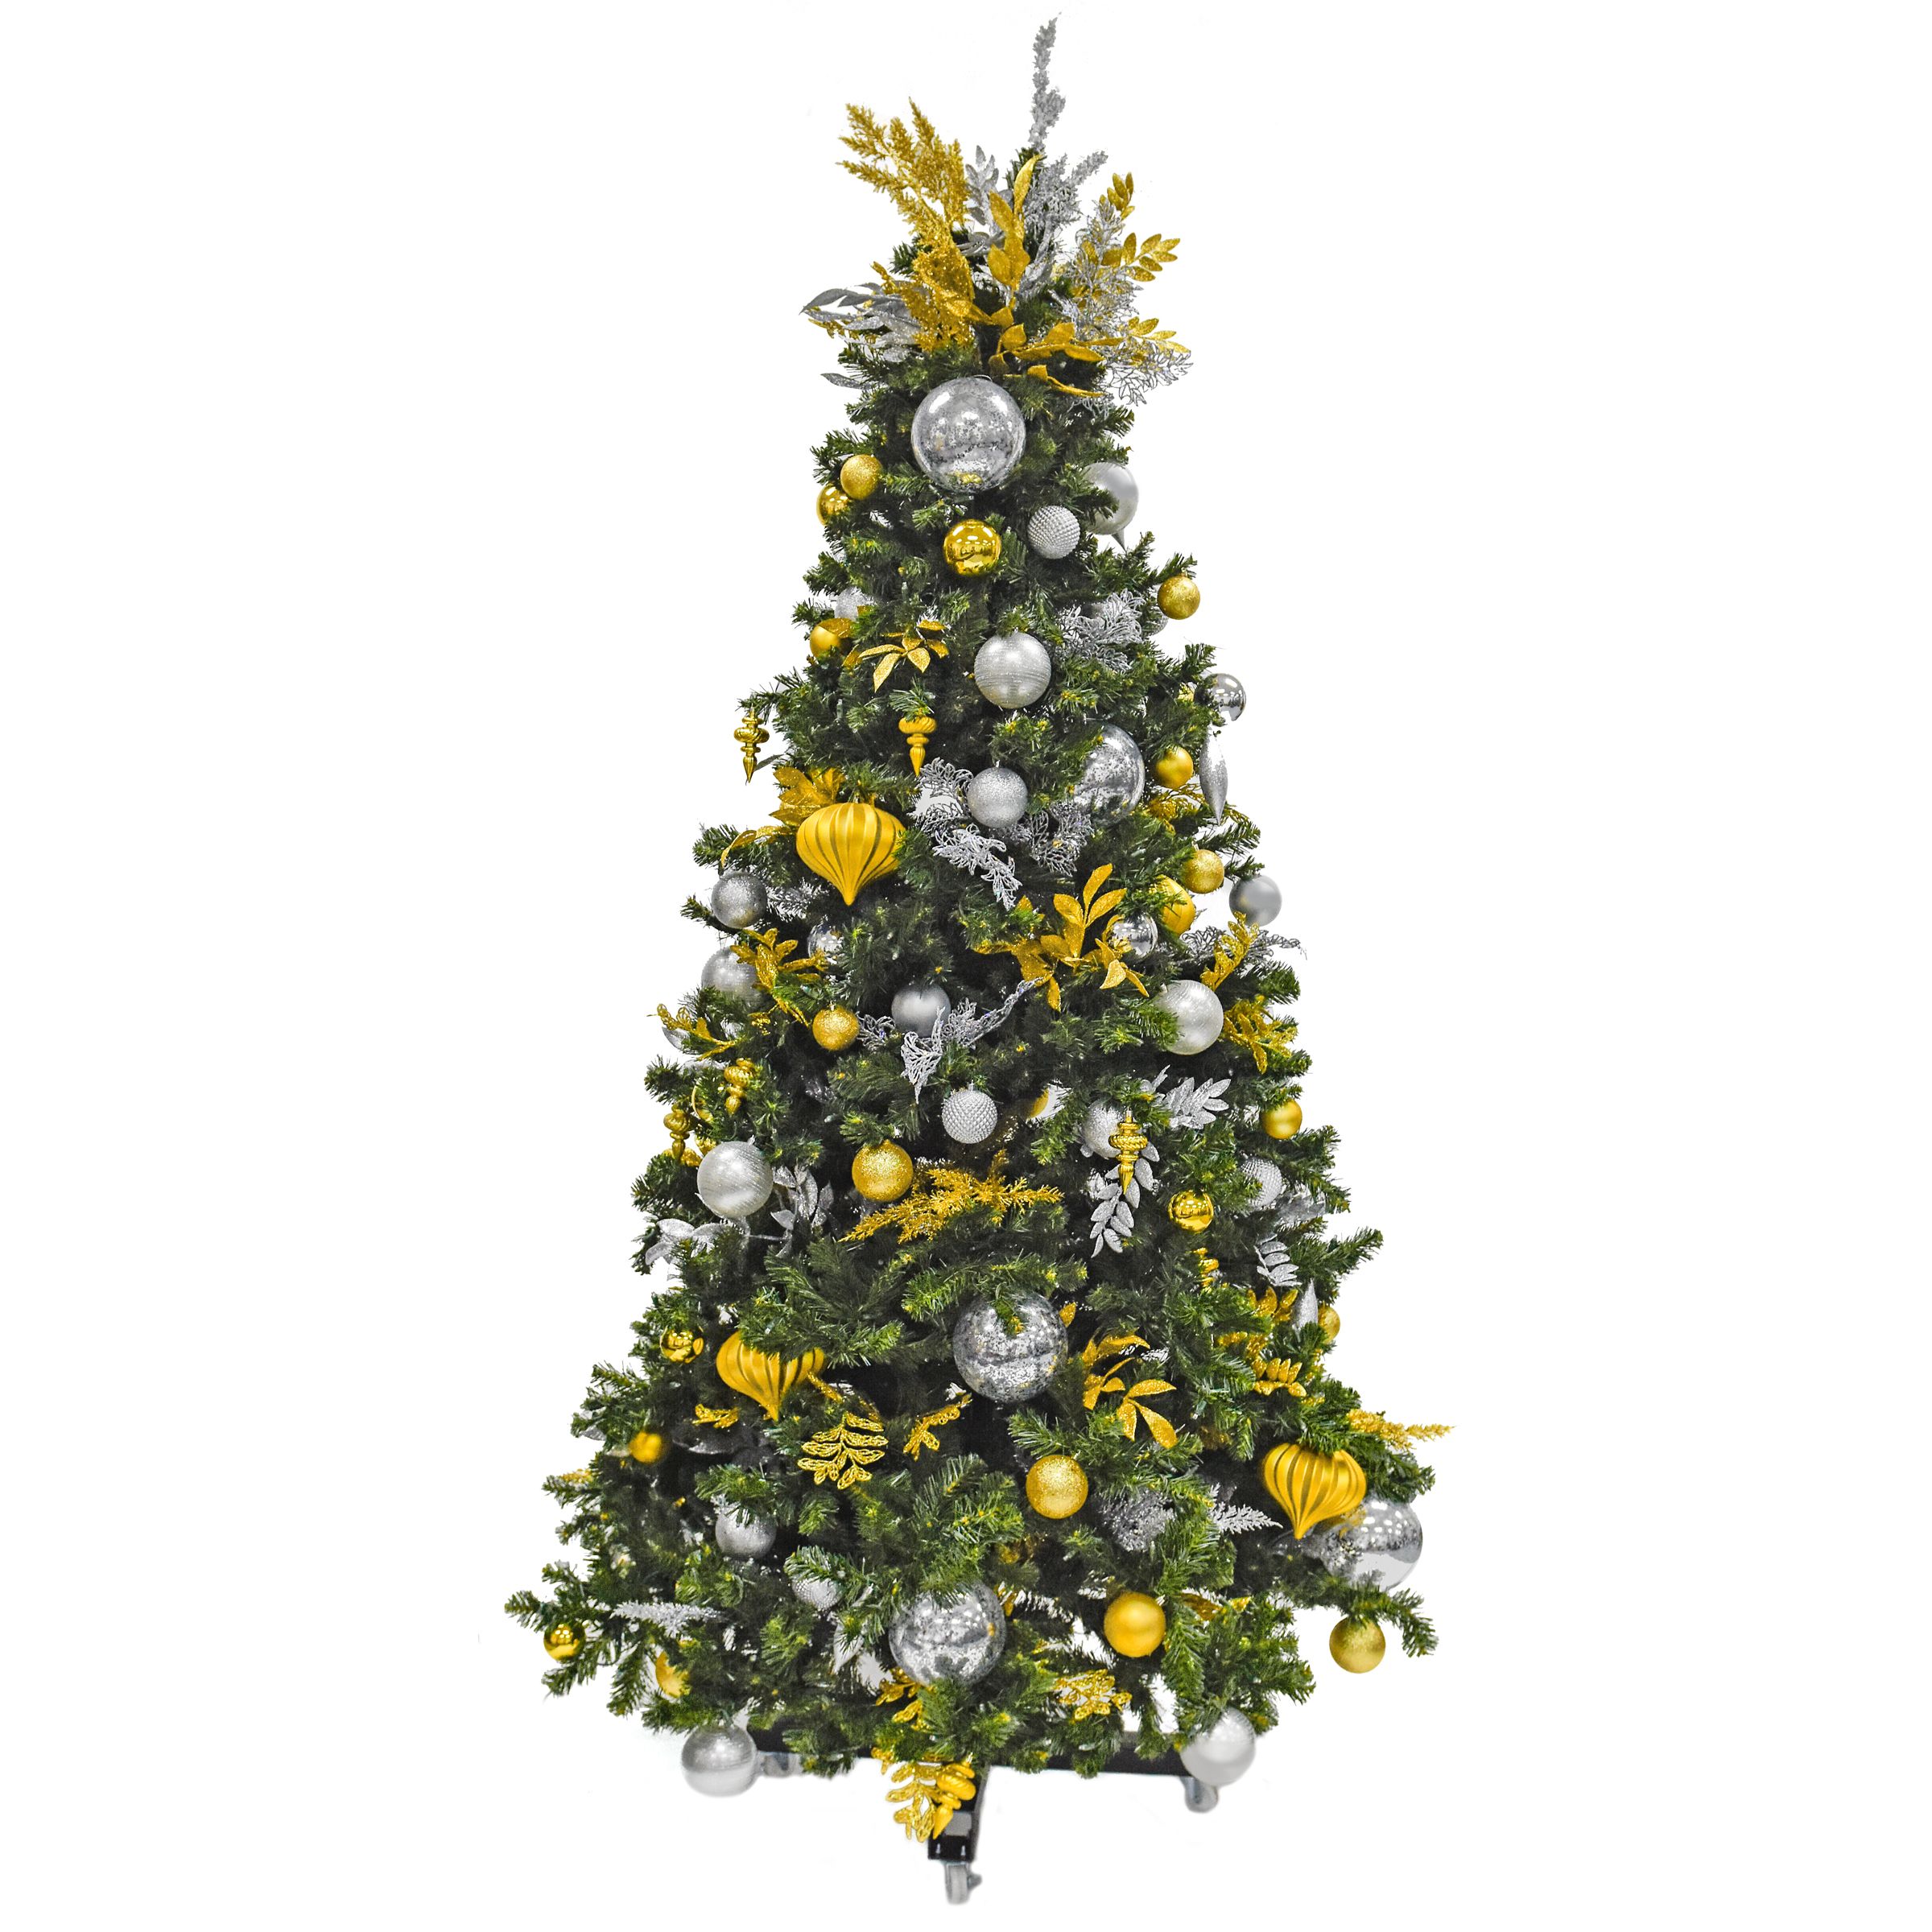 Tinsel Treasures - A gold and silver Christmas tree, lights off